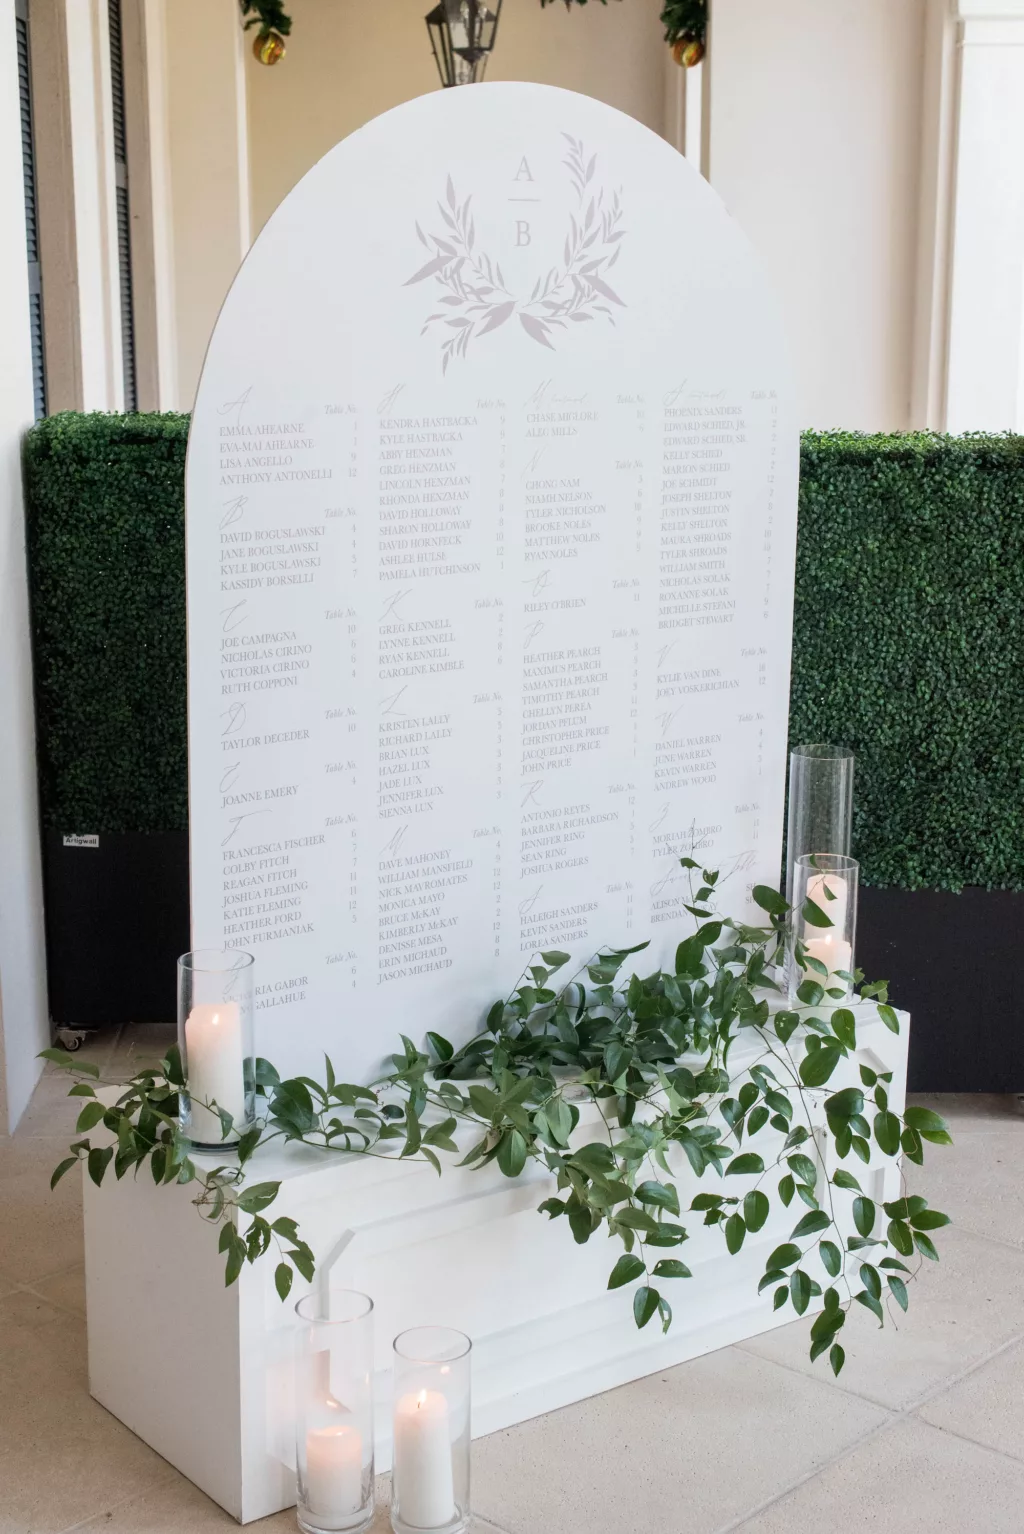 Elegant White Arch Wedding Reception Seating Chart with Greenery and Pillar Candles Inspiration